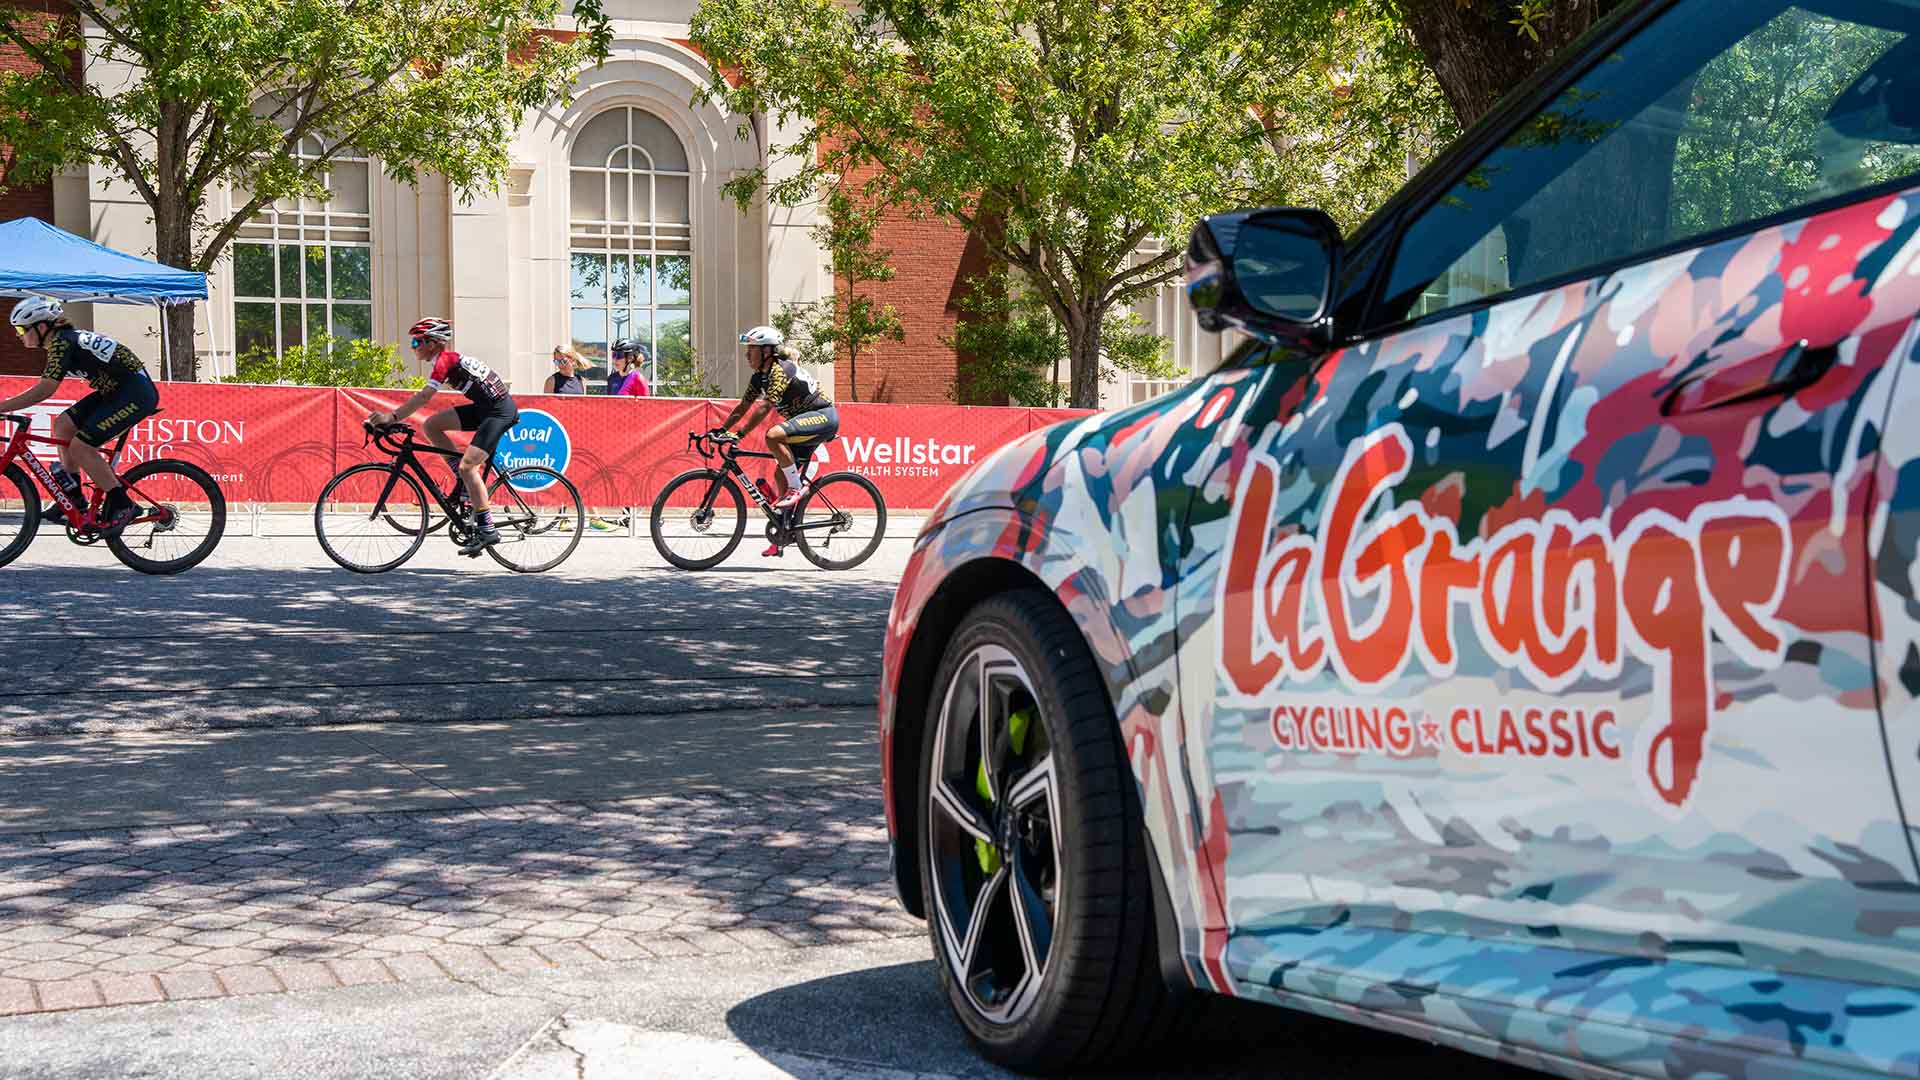 A photo taken at the LaGrange Cycling Classic, an event taking place annually in LaGrange, Georgia.